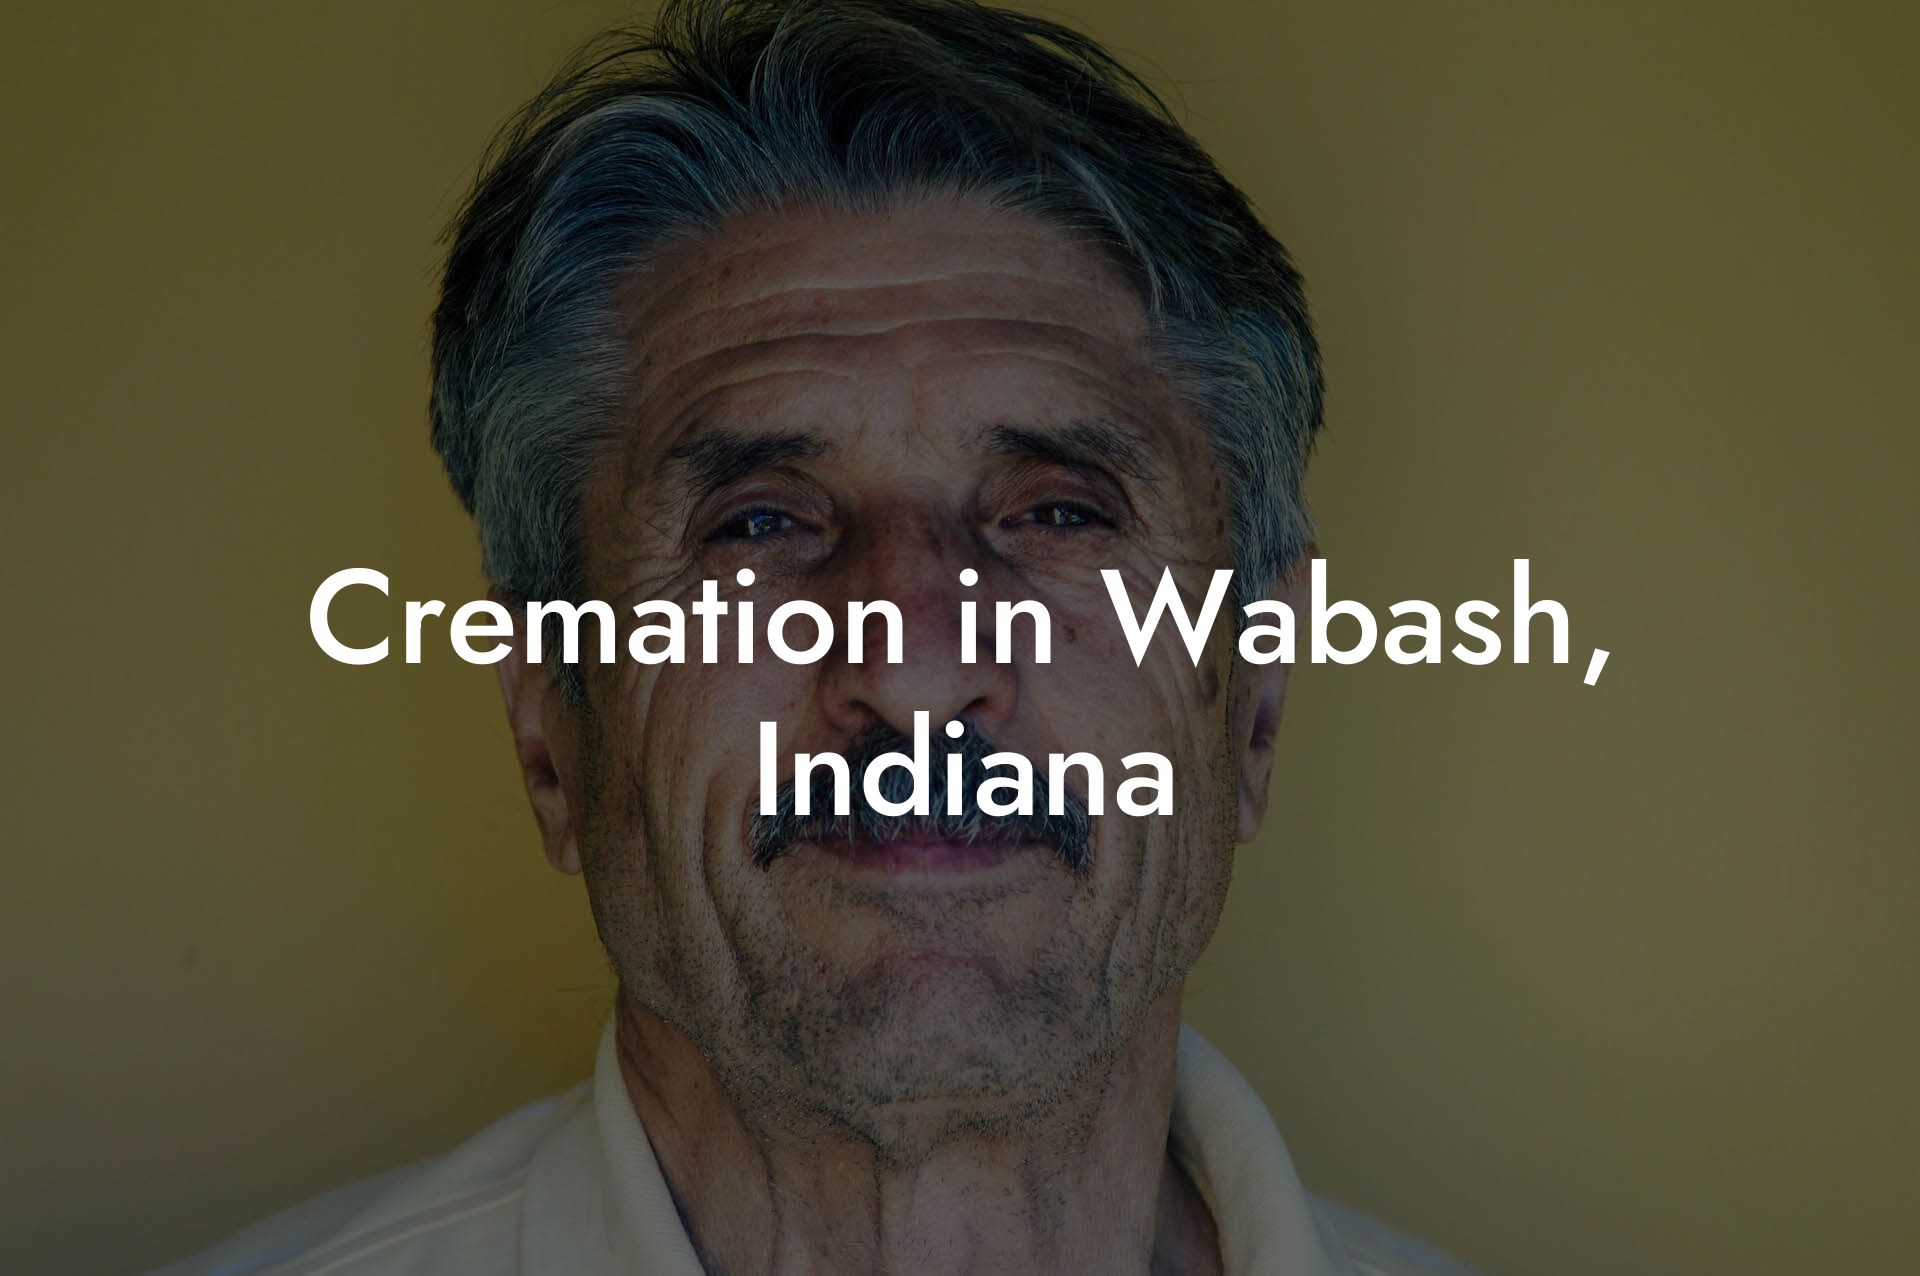 Cremation in Wabash, Indiana